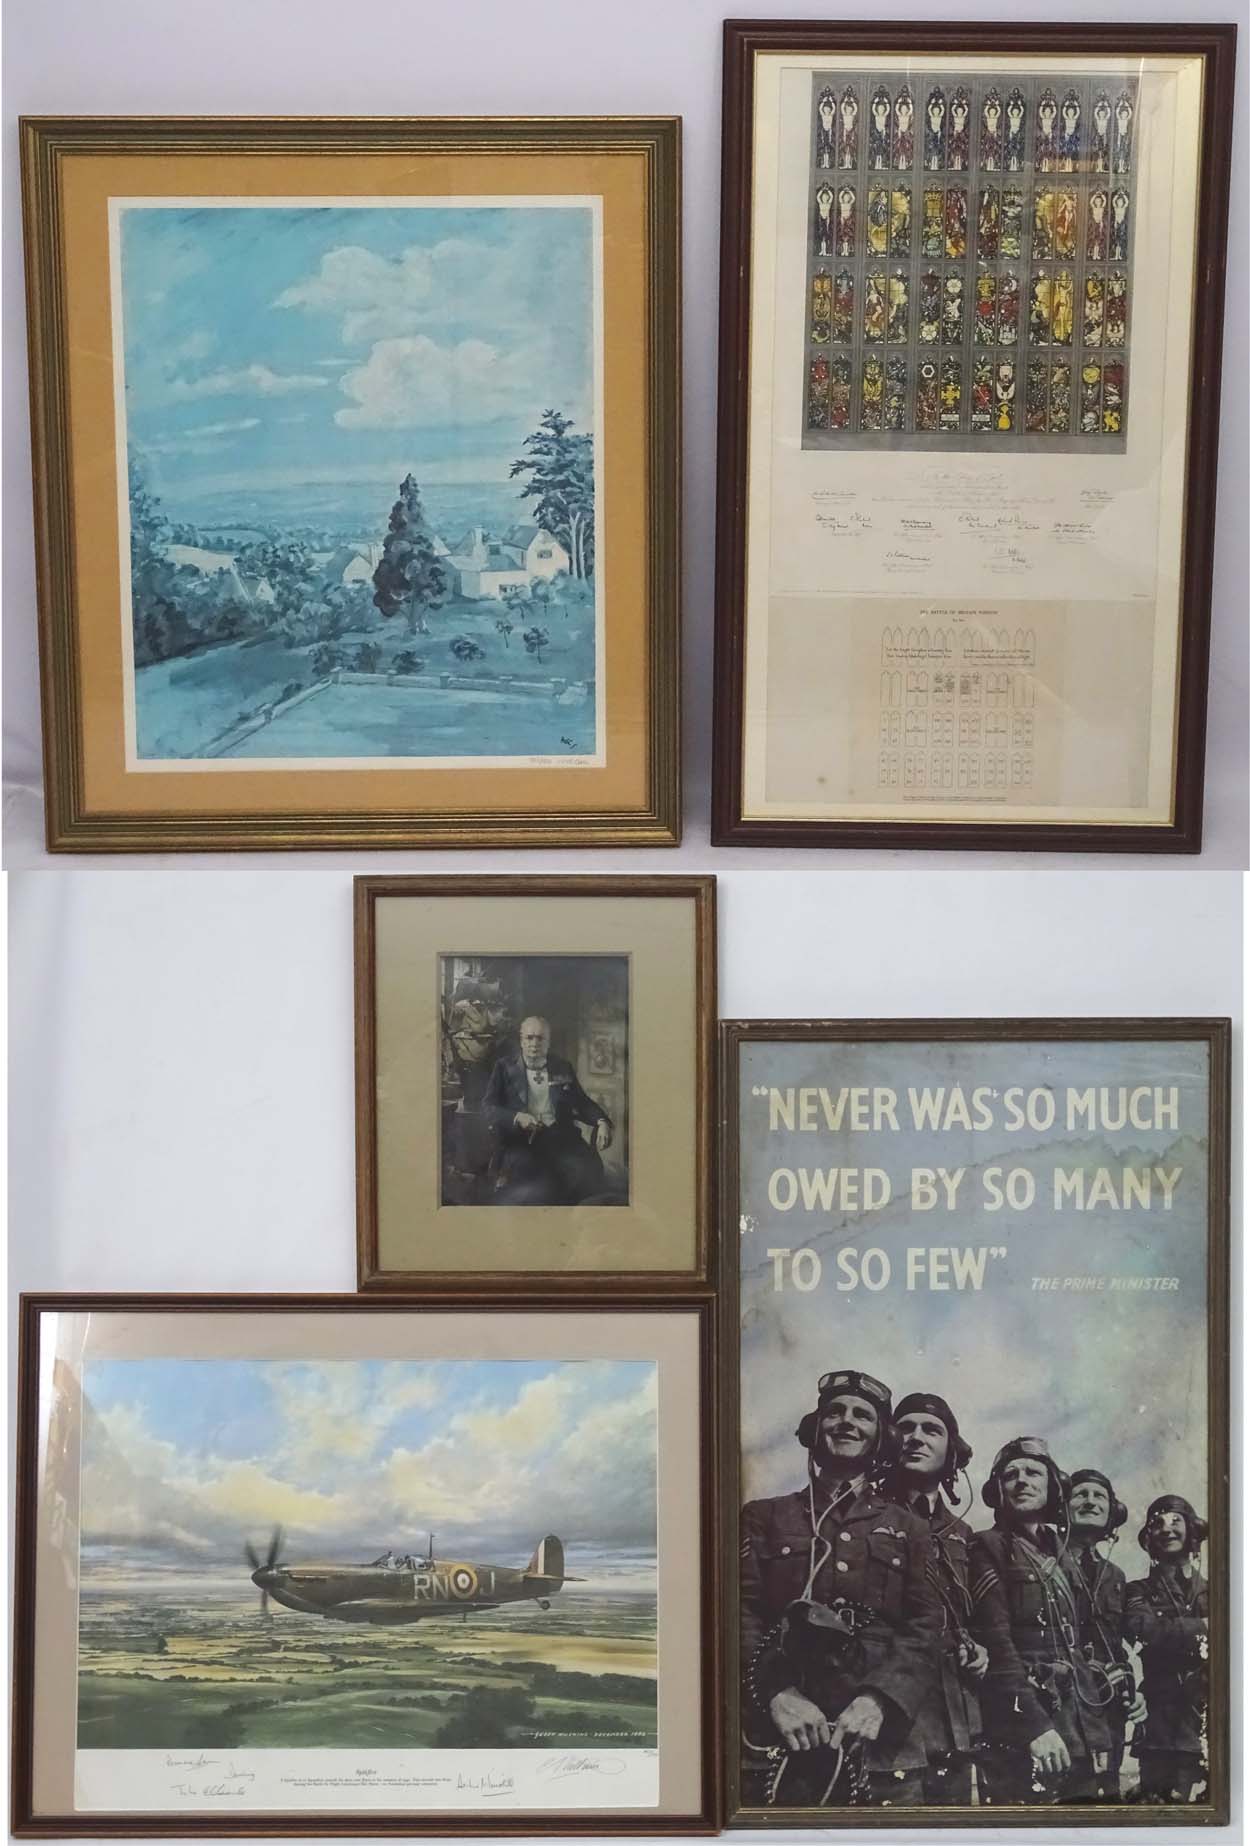 Militaria: WWII Battle of Britain and Sir Winston Churchill memorabilia consisting of a limited